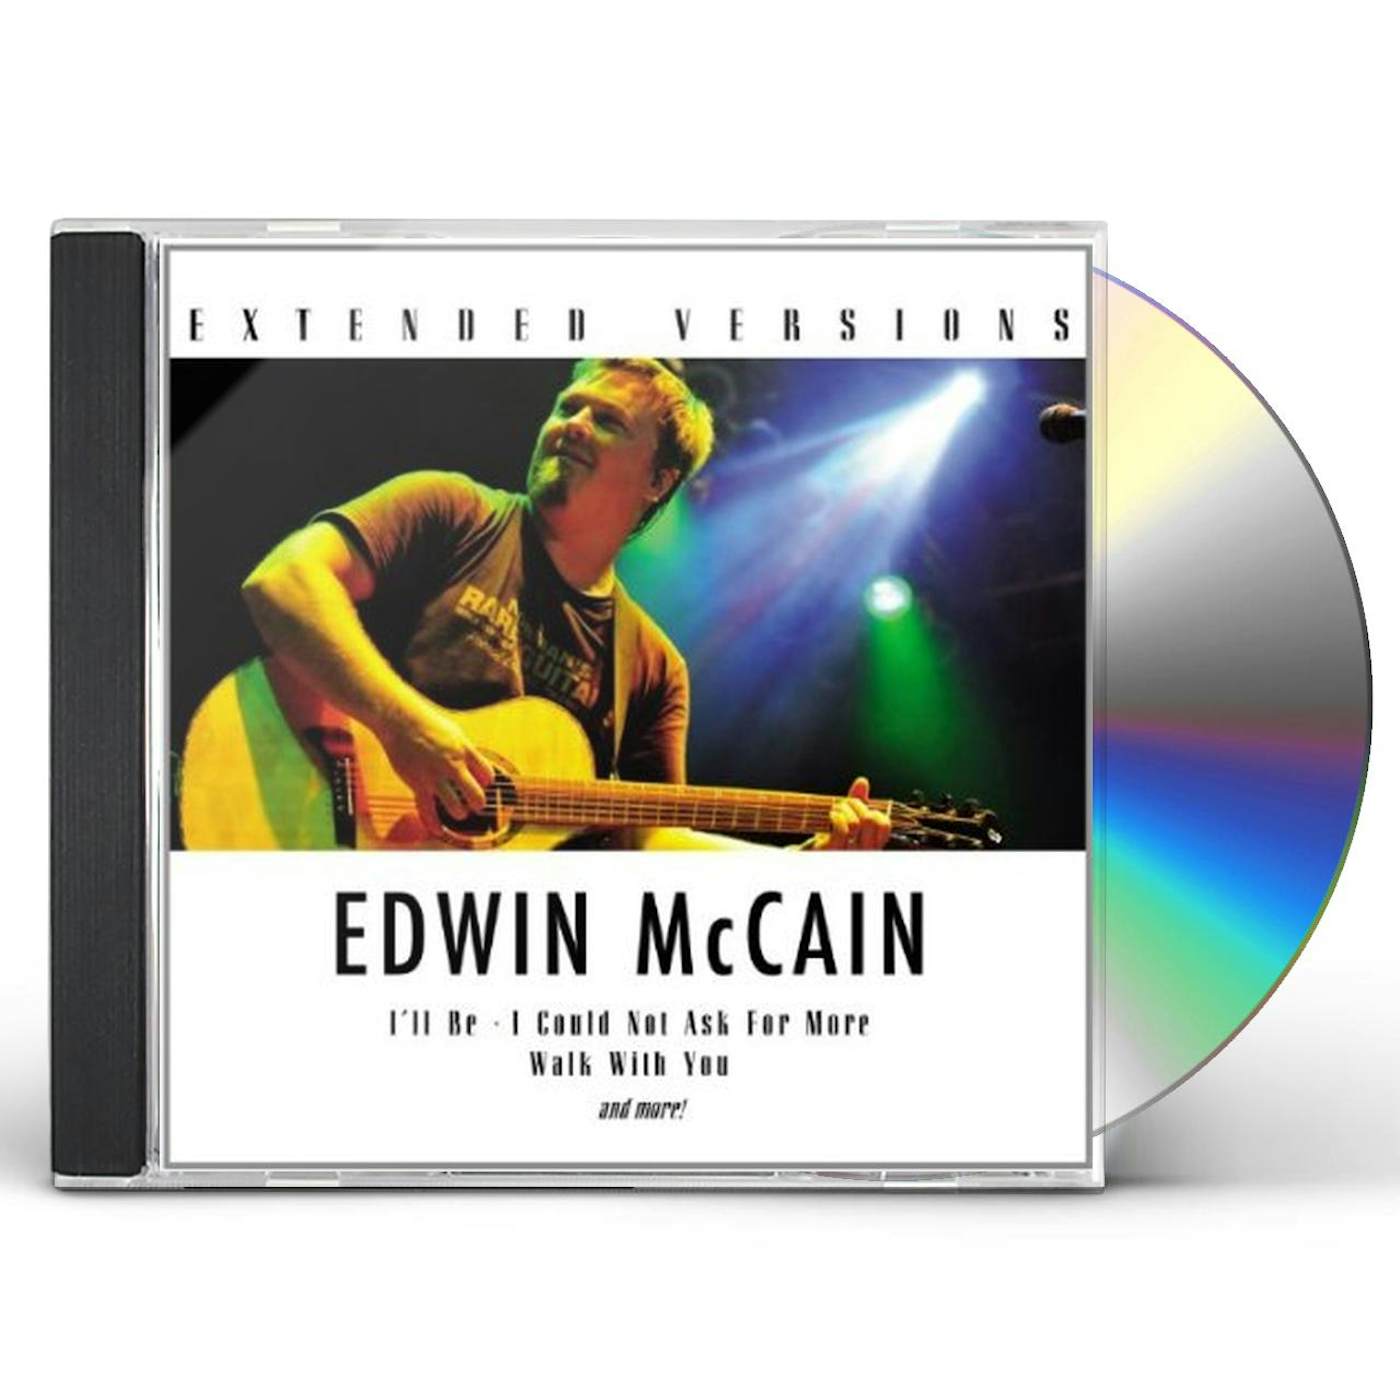 Edwin McCain EXTENDED VERSIONS CD